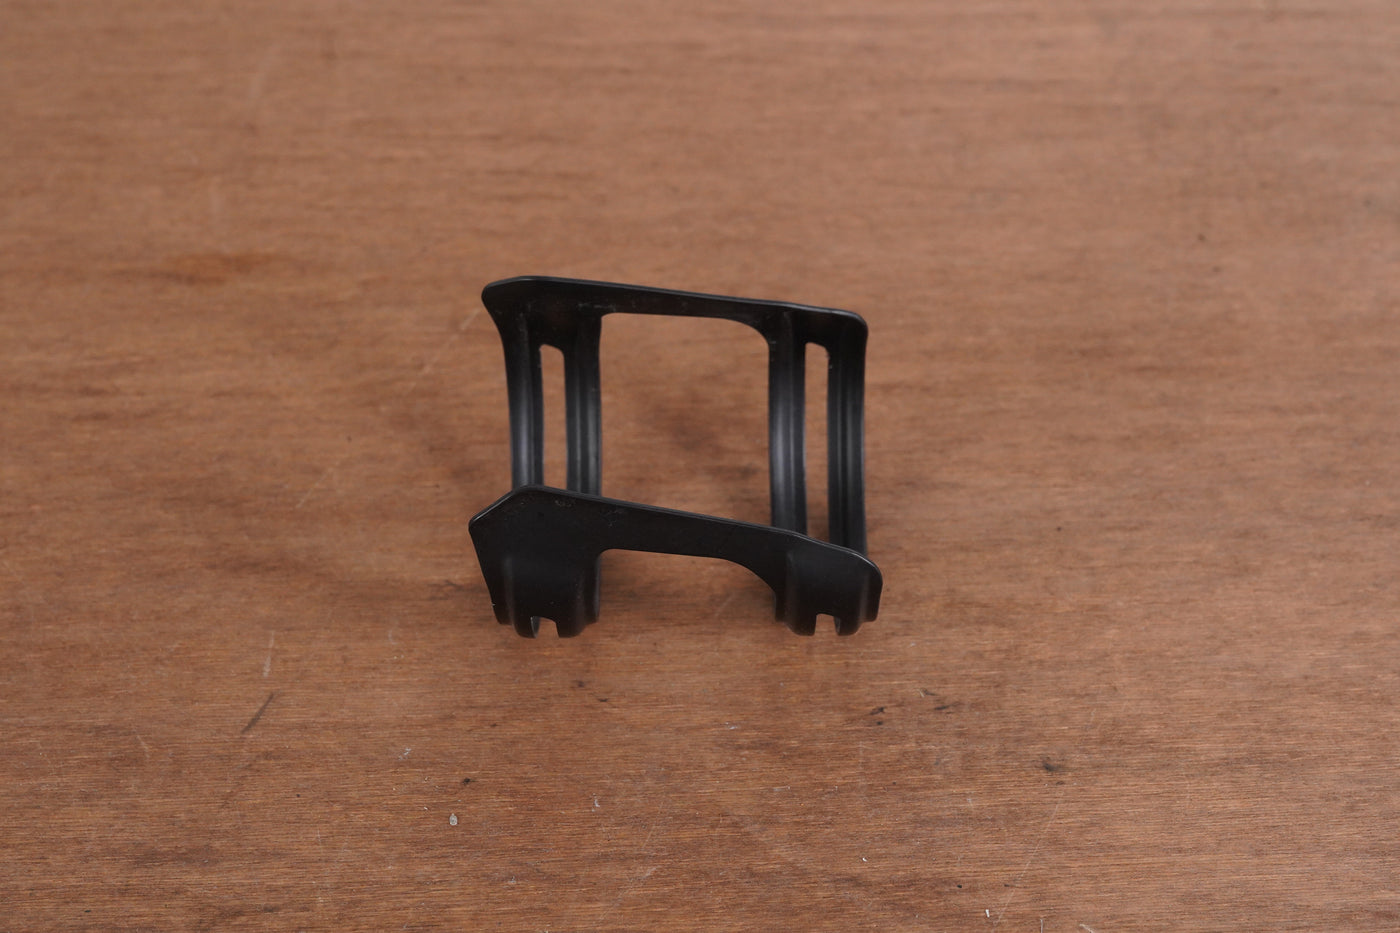 (1) Alloy Water Bottle Cage 32g